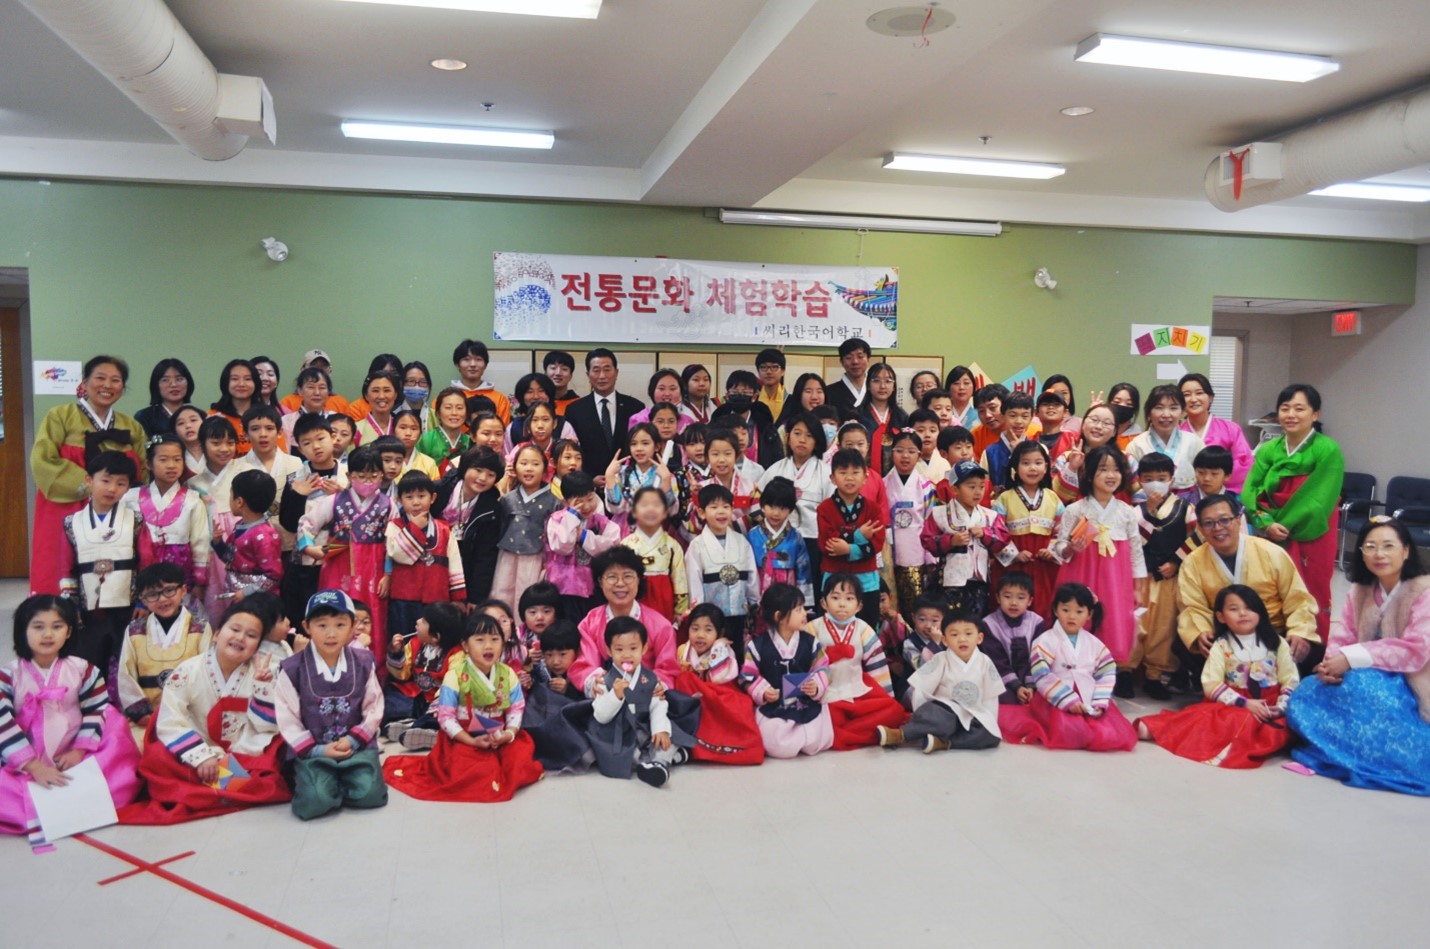 Lunar New Year Celebrations with Hanbok Donated From Korea